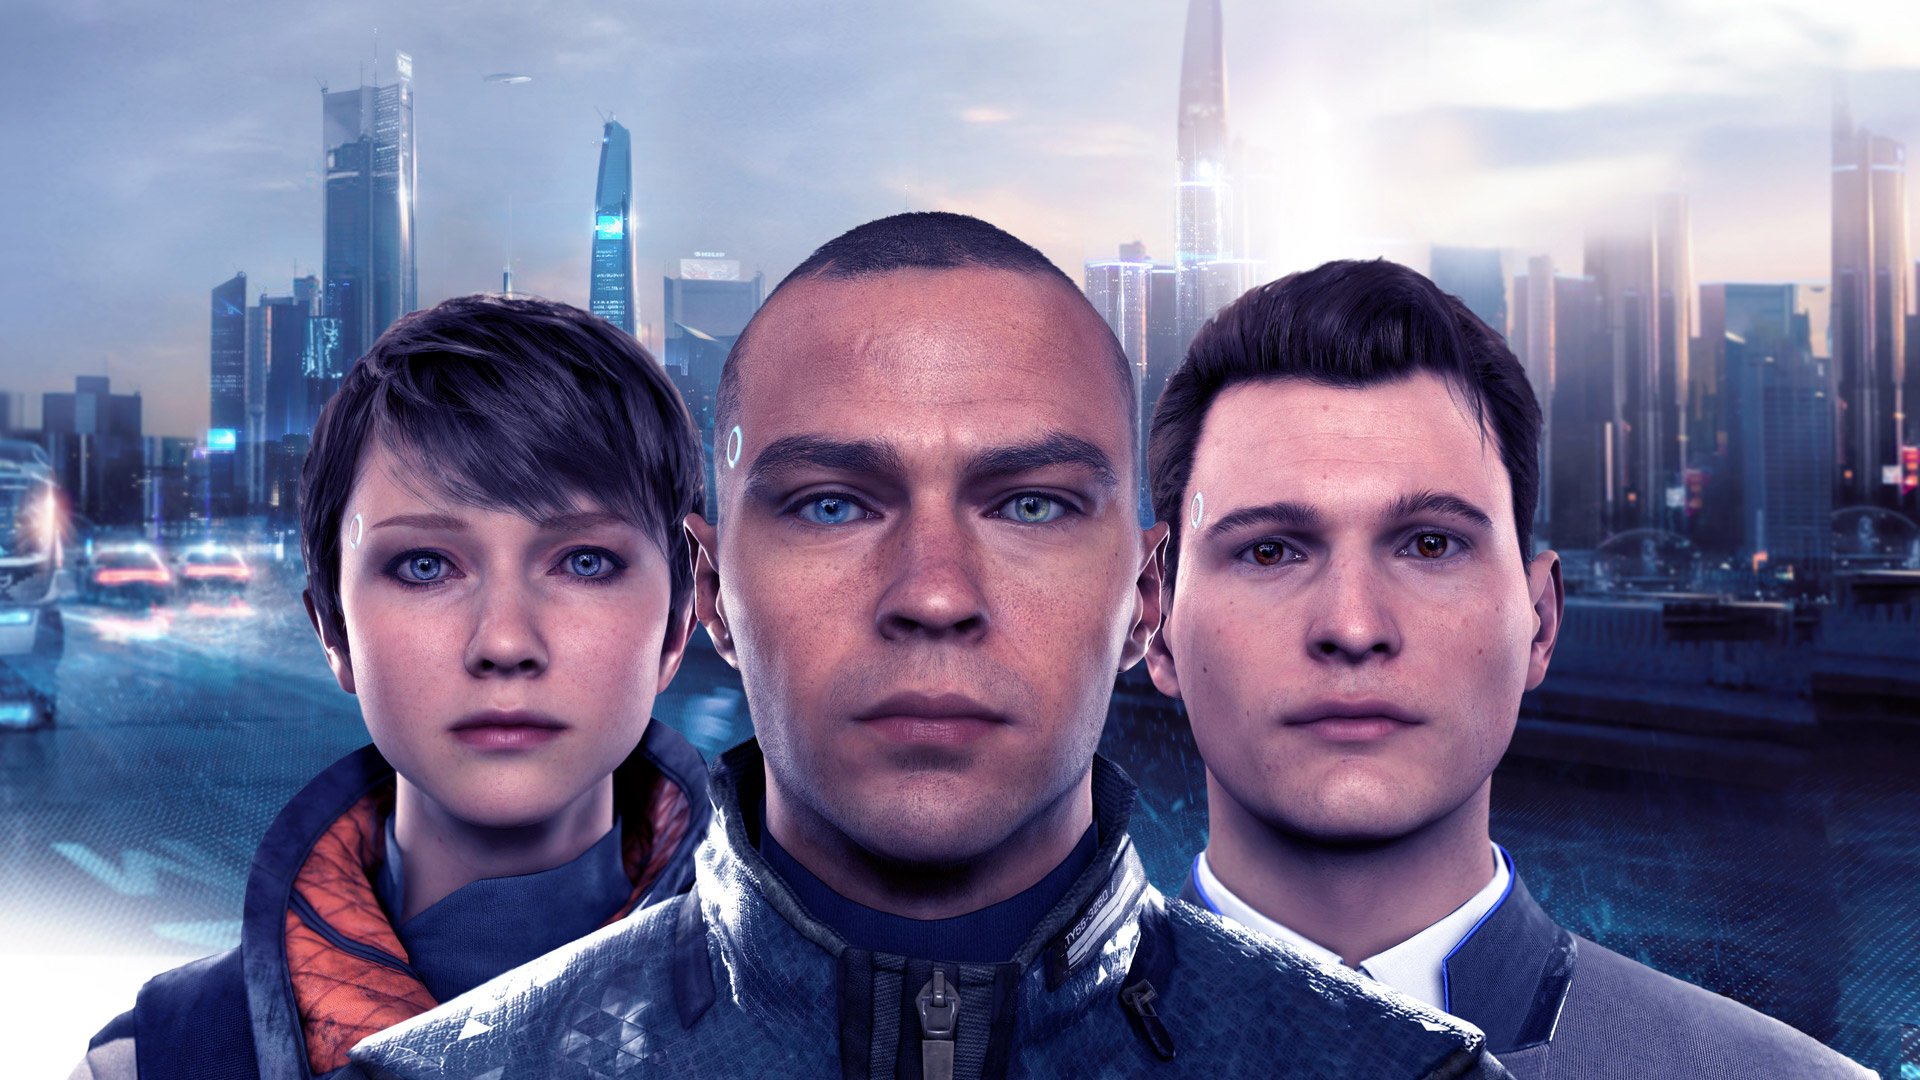 detroit become human free ps4